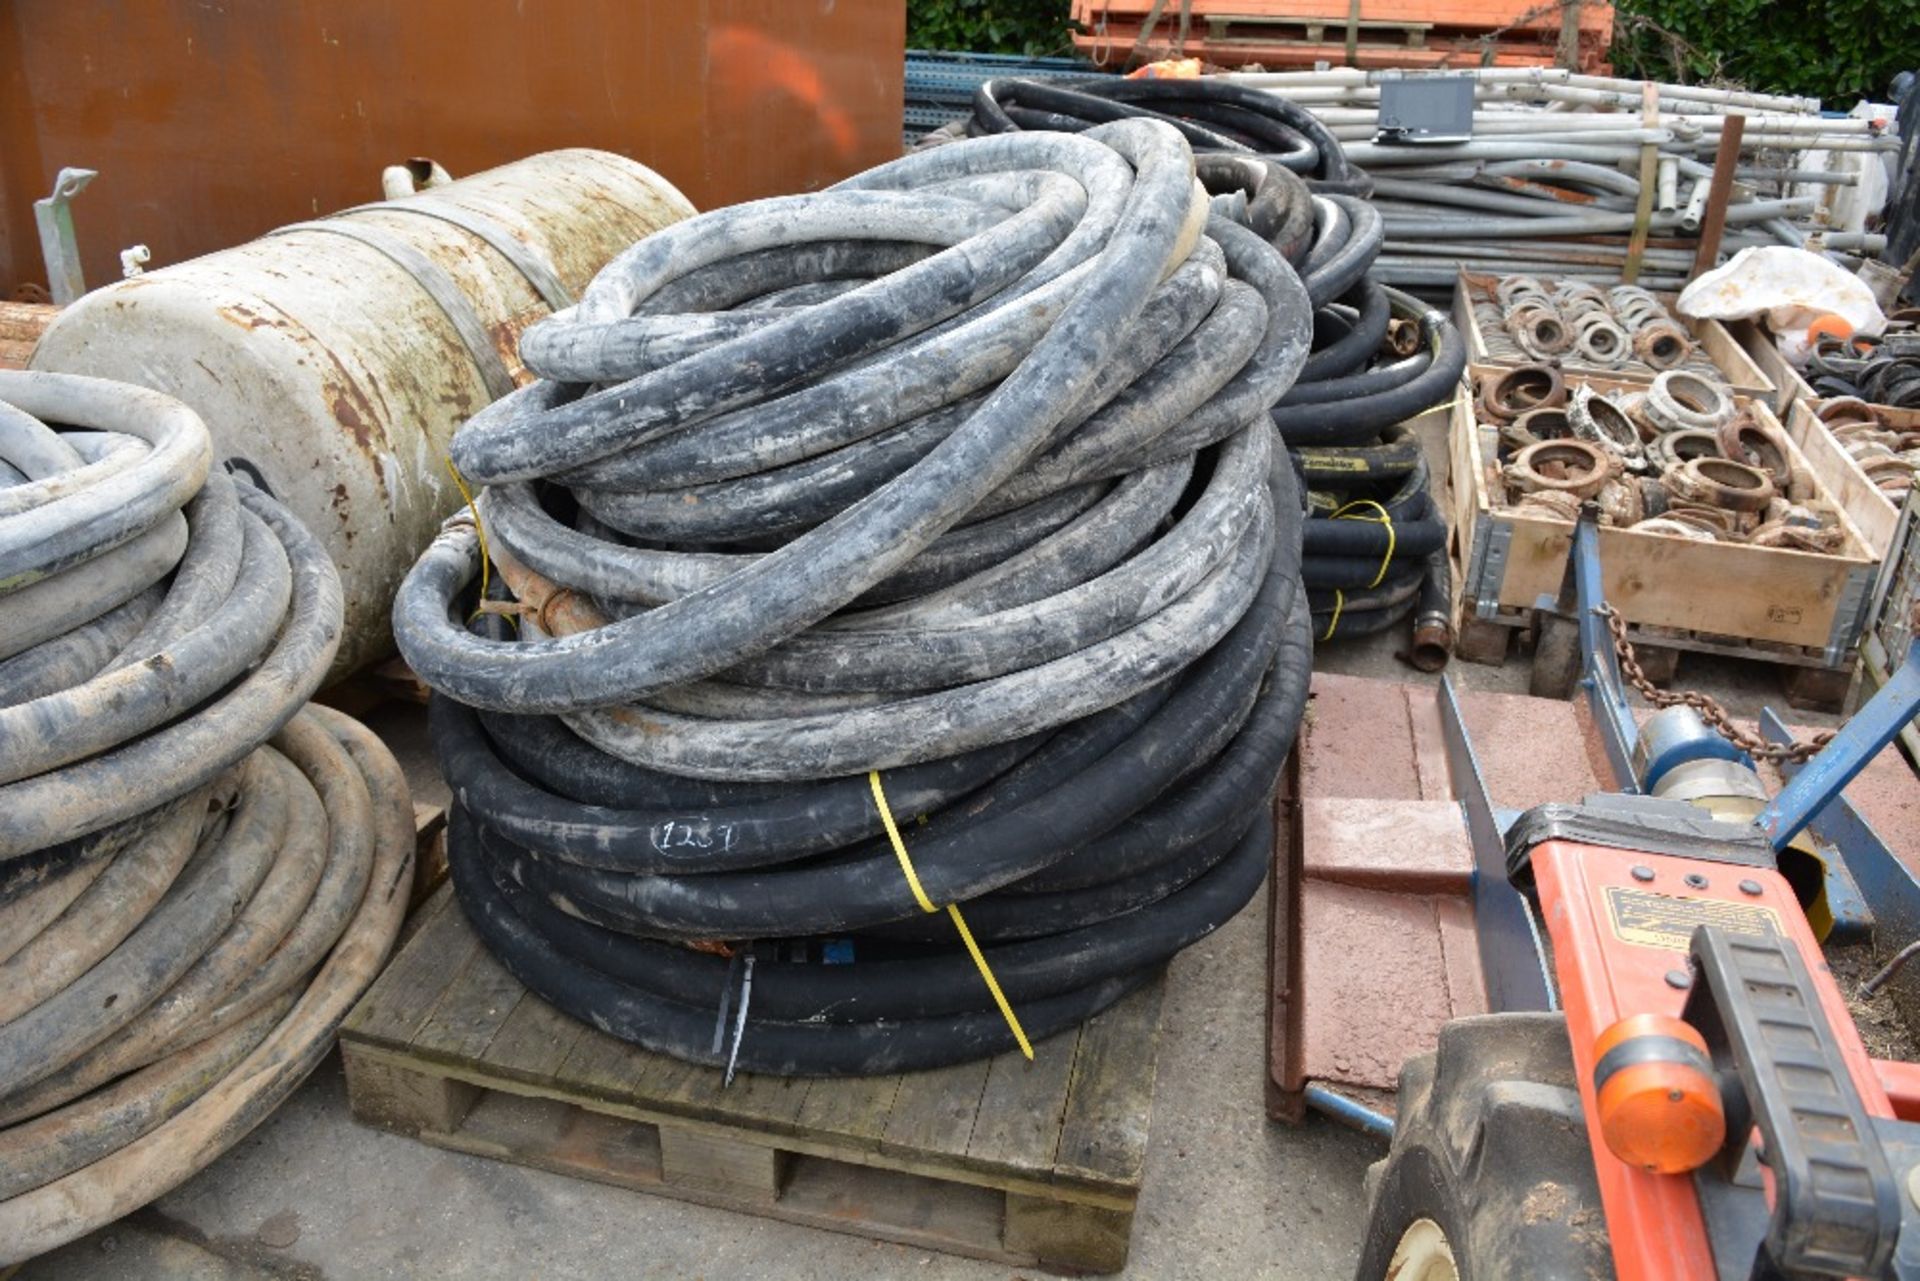 ASSORTED GROUT / SCREED PIPES (1 PALLET), ID: PL-15661, RUISLIP PLANT HIRE LTD. *UNRESERVED*